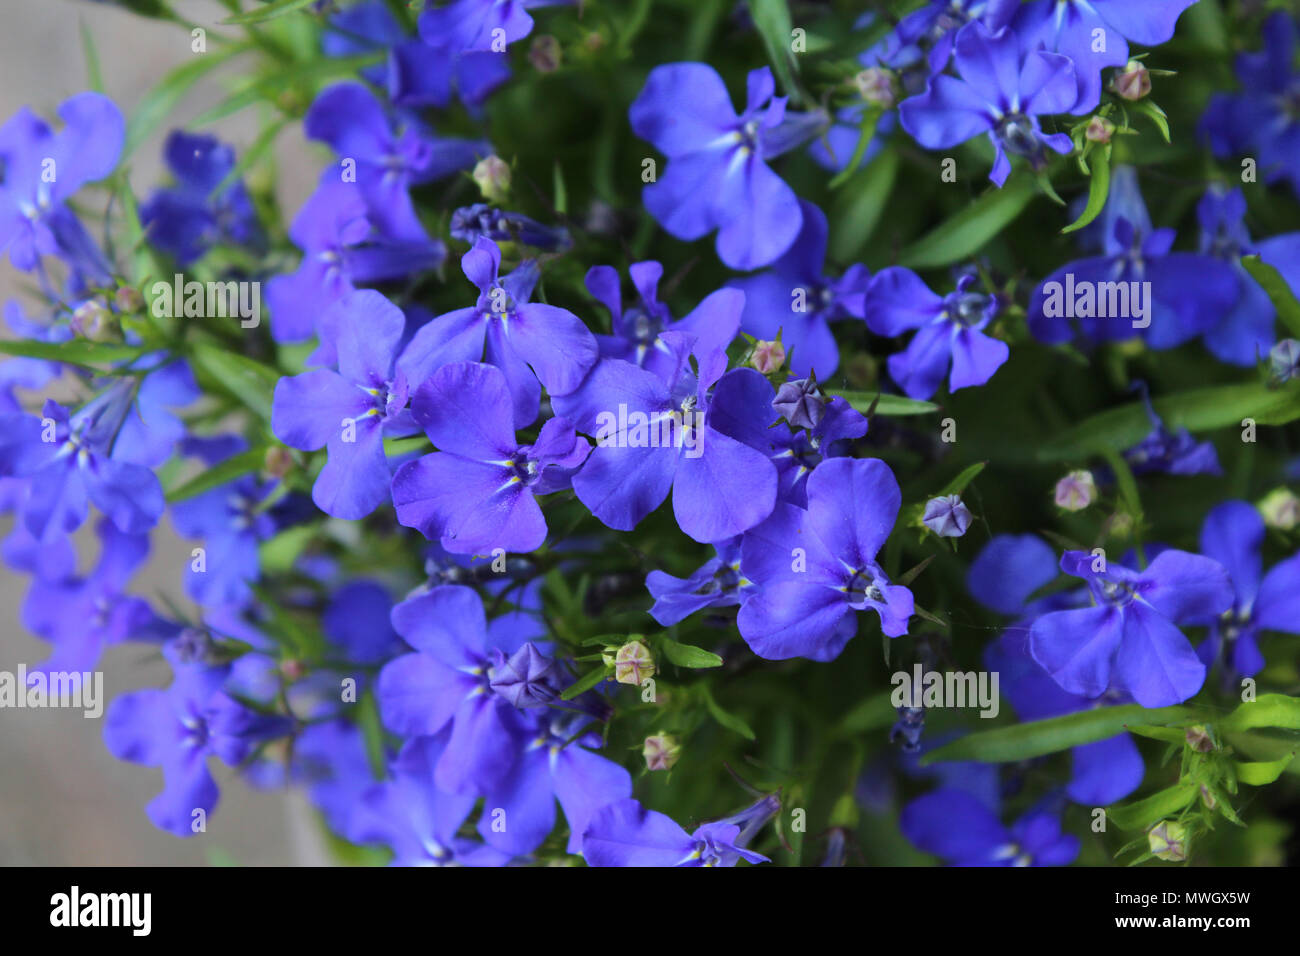 The beautiful sapphire blue flowers of Lobelia erinus, a popular summer bedding plant, growing in a pot. Stock Photo